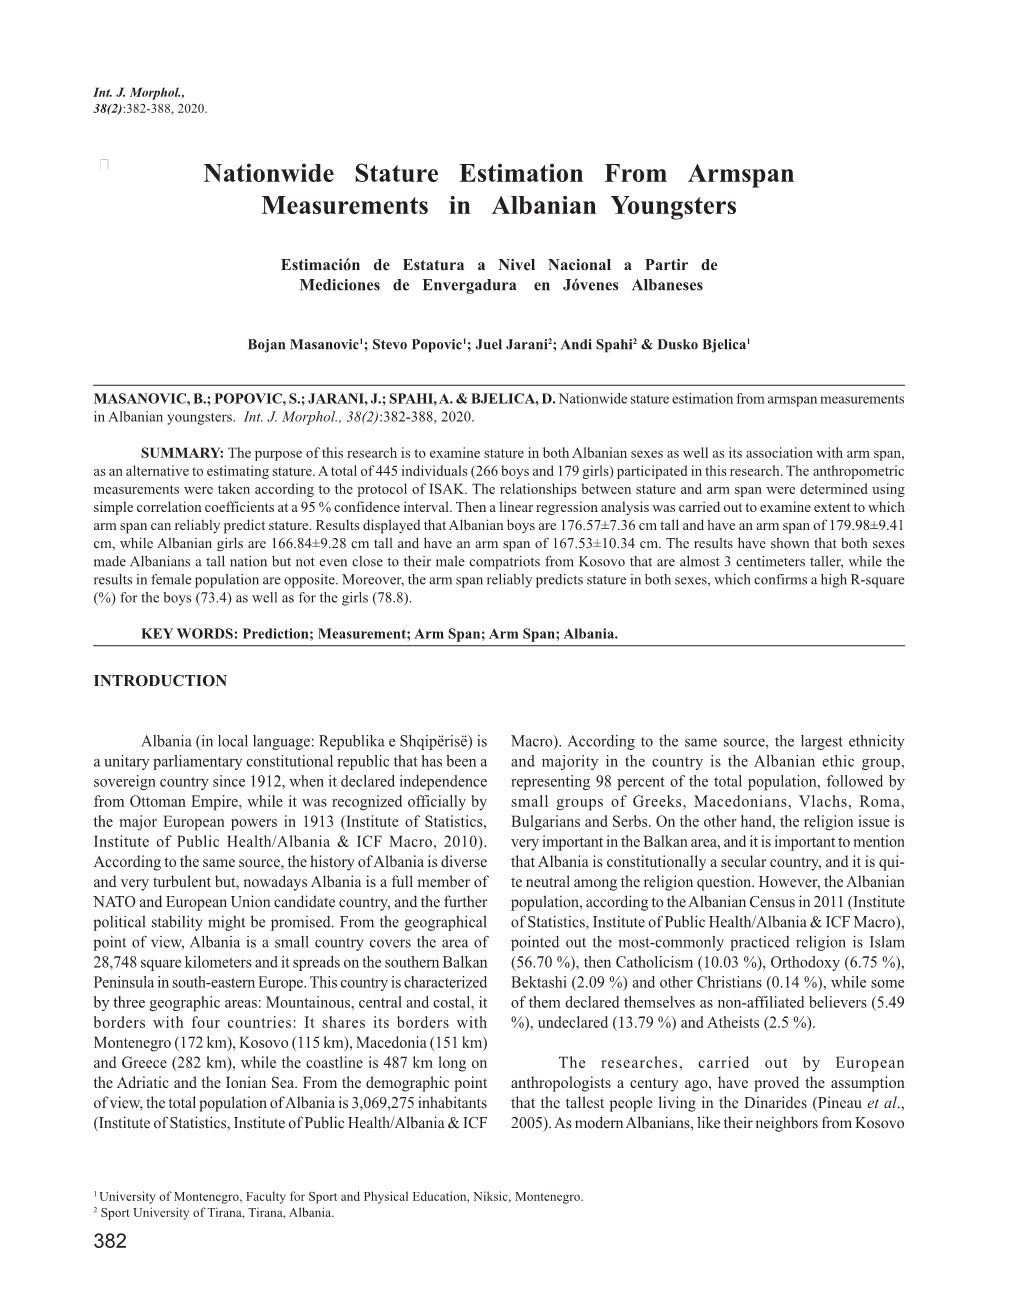 Nationwide Stature Estimation from Armspan Measurements in Albanian Youngsters